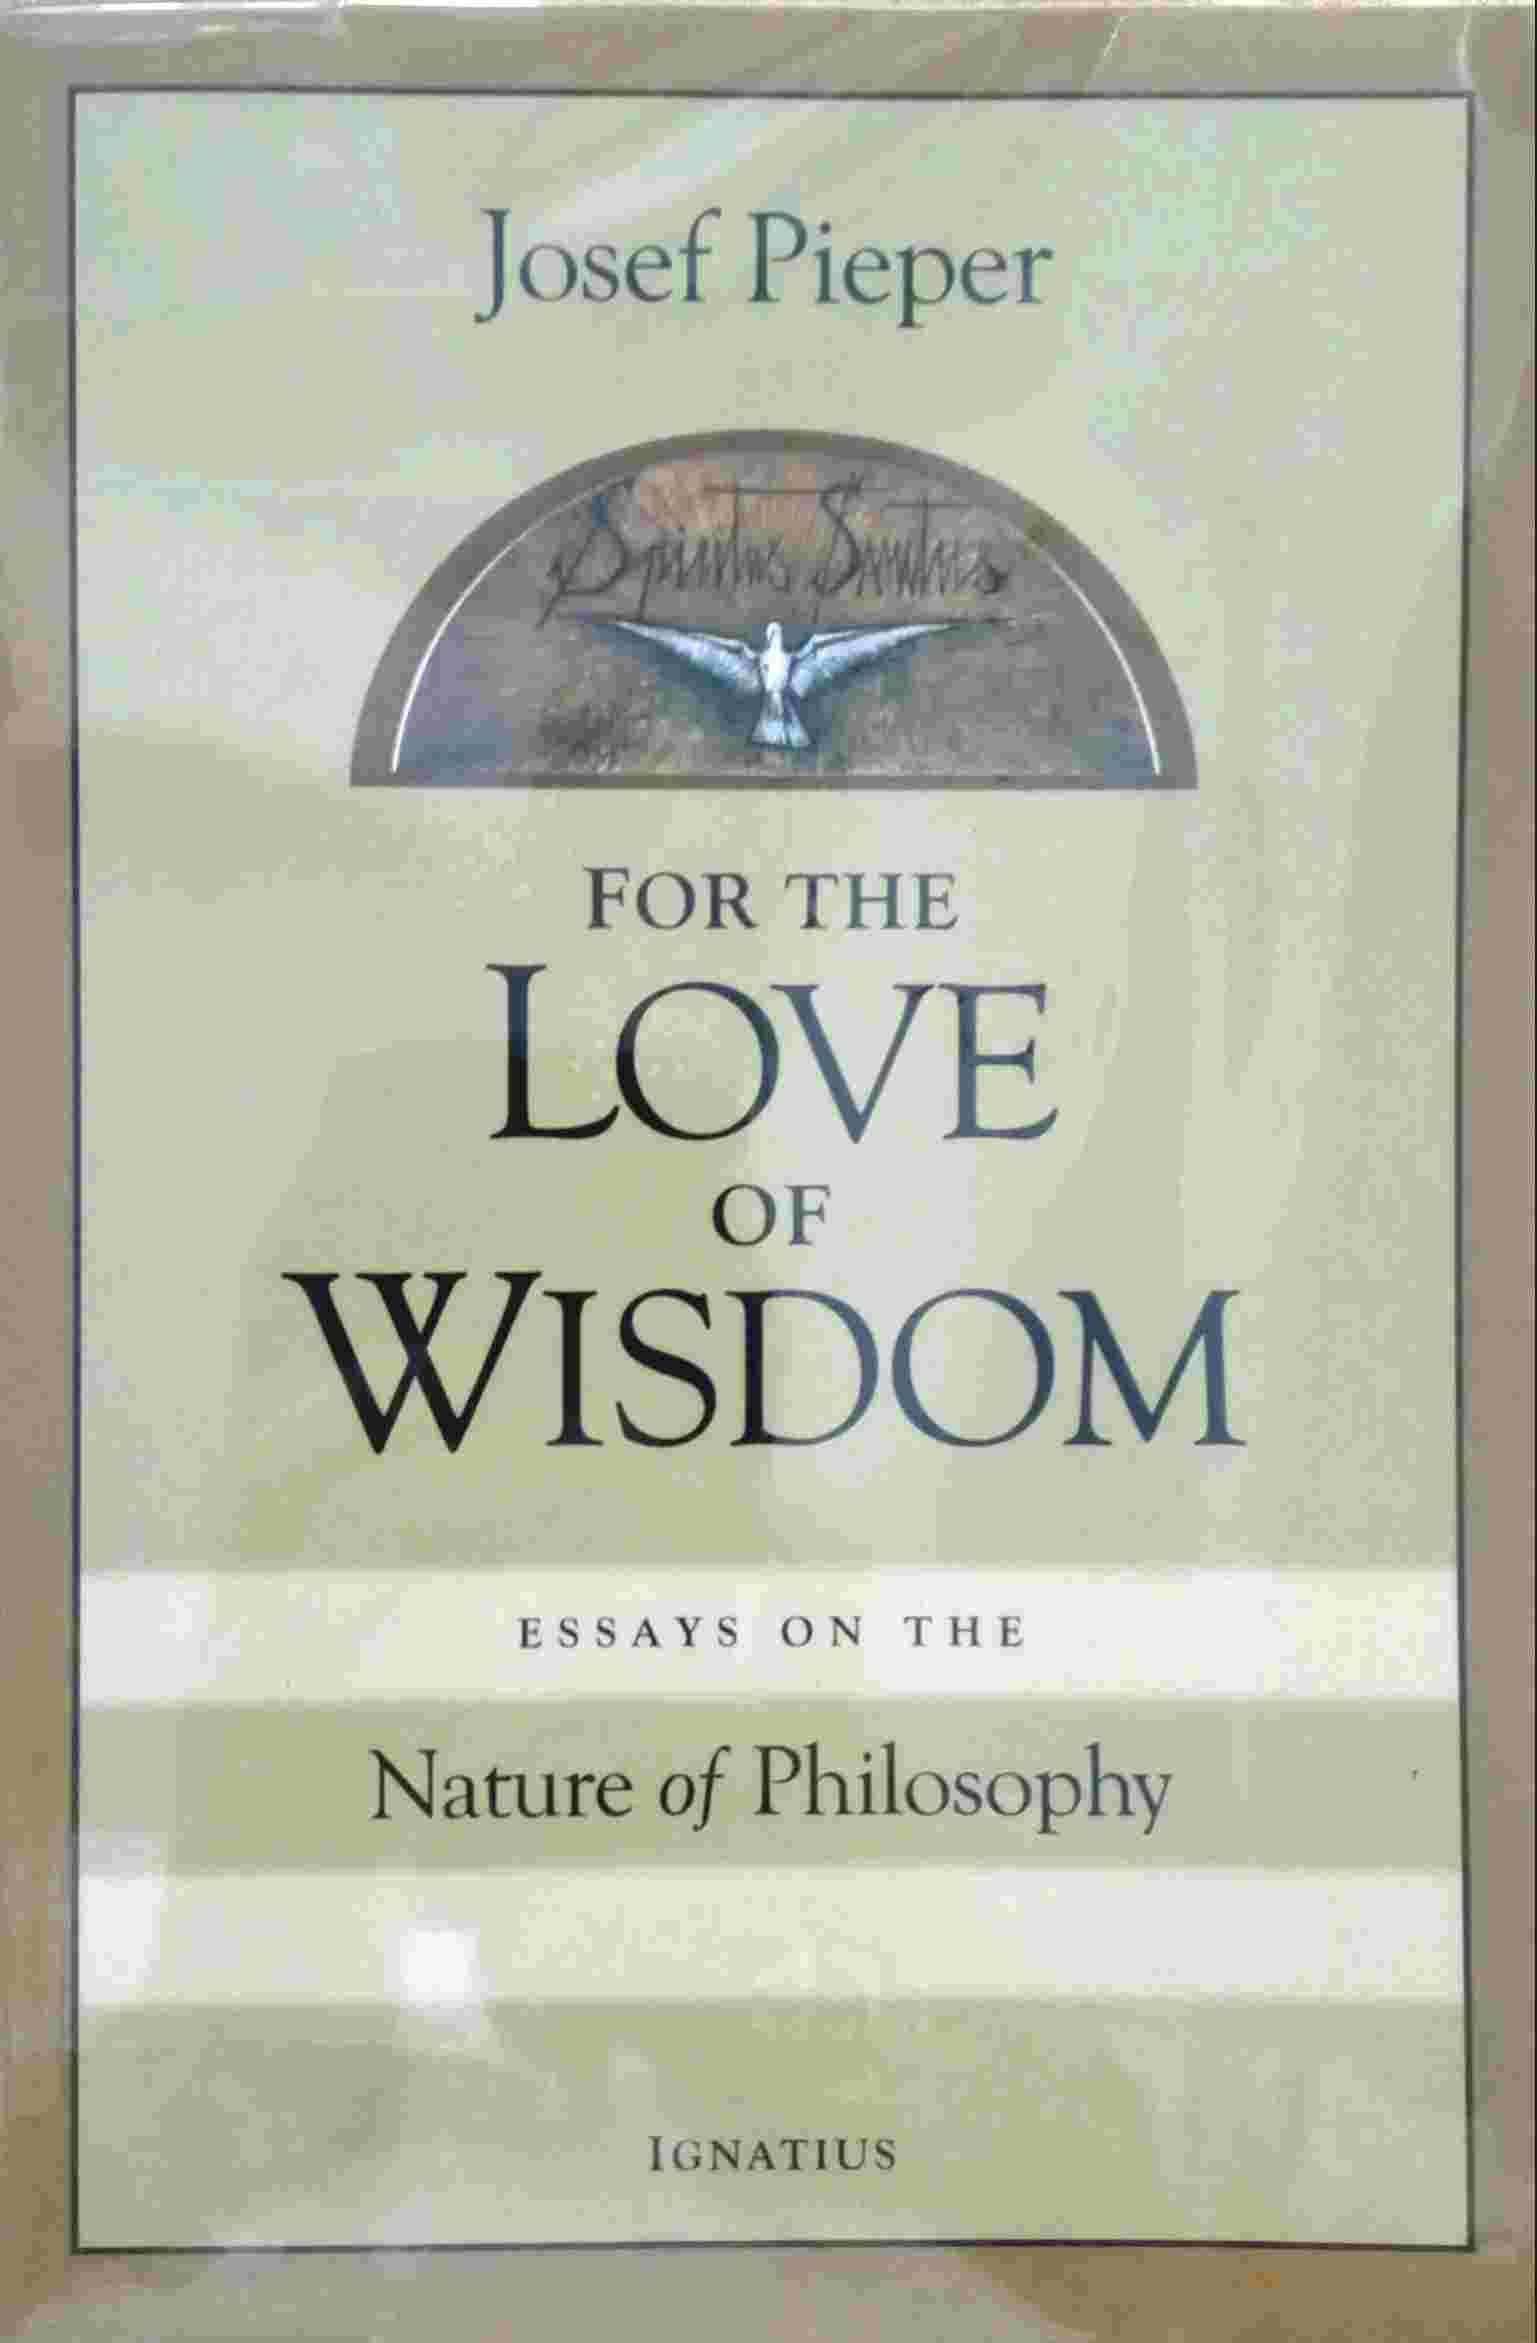 FOR THE LOVE OF WISDOM